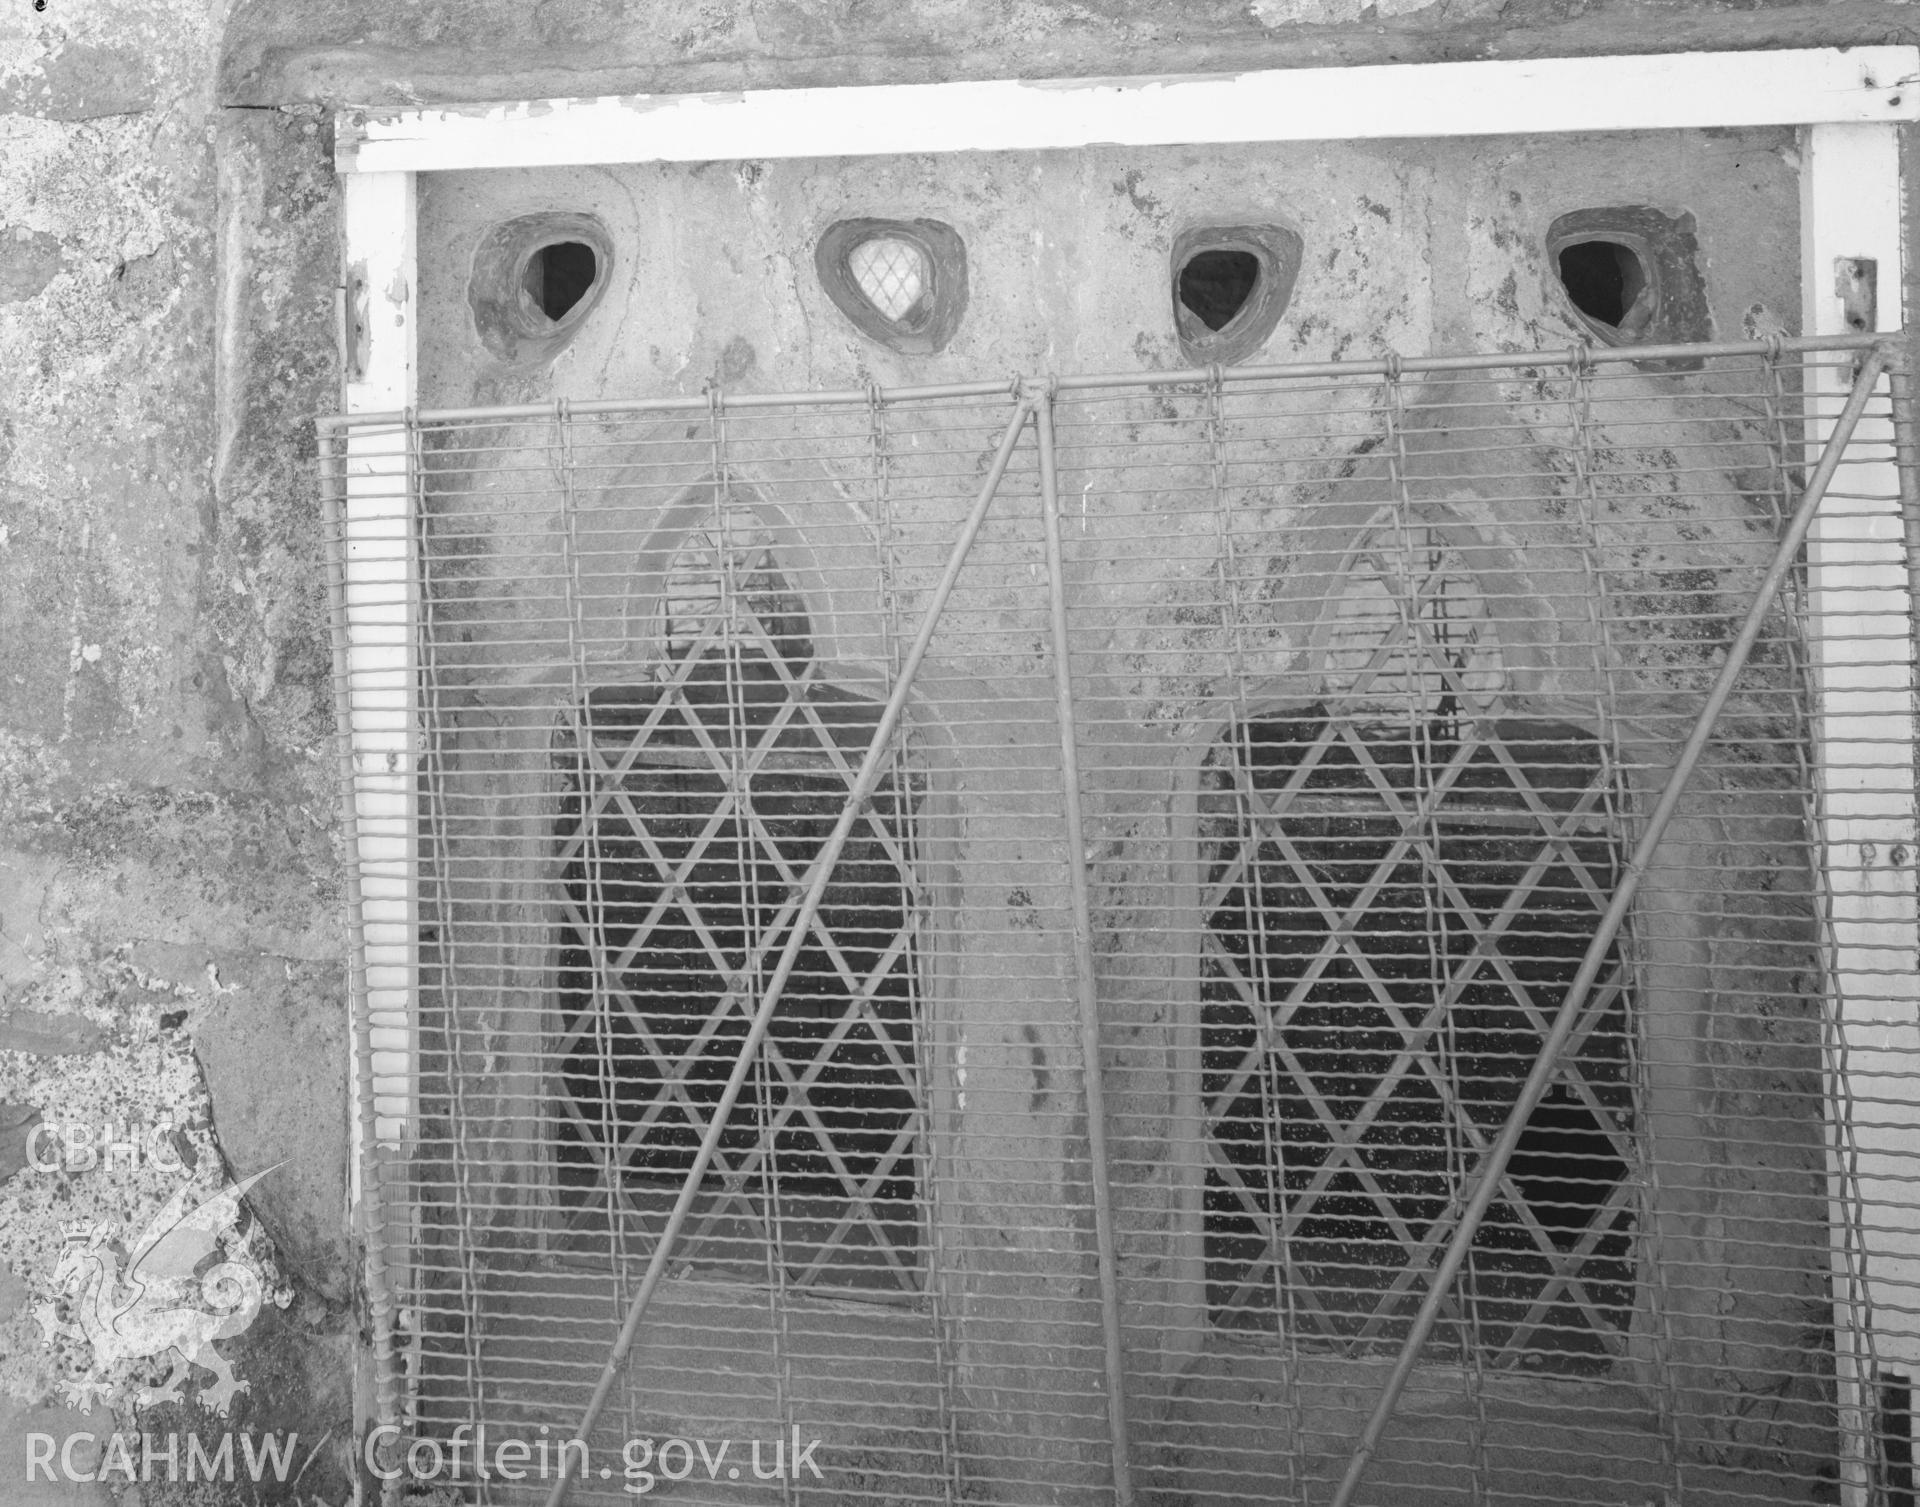 Black and white acetate negative showing a window at St Tanwg's Church.